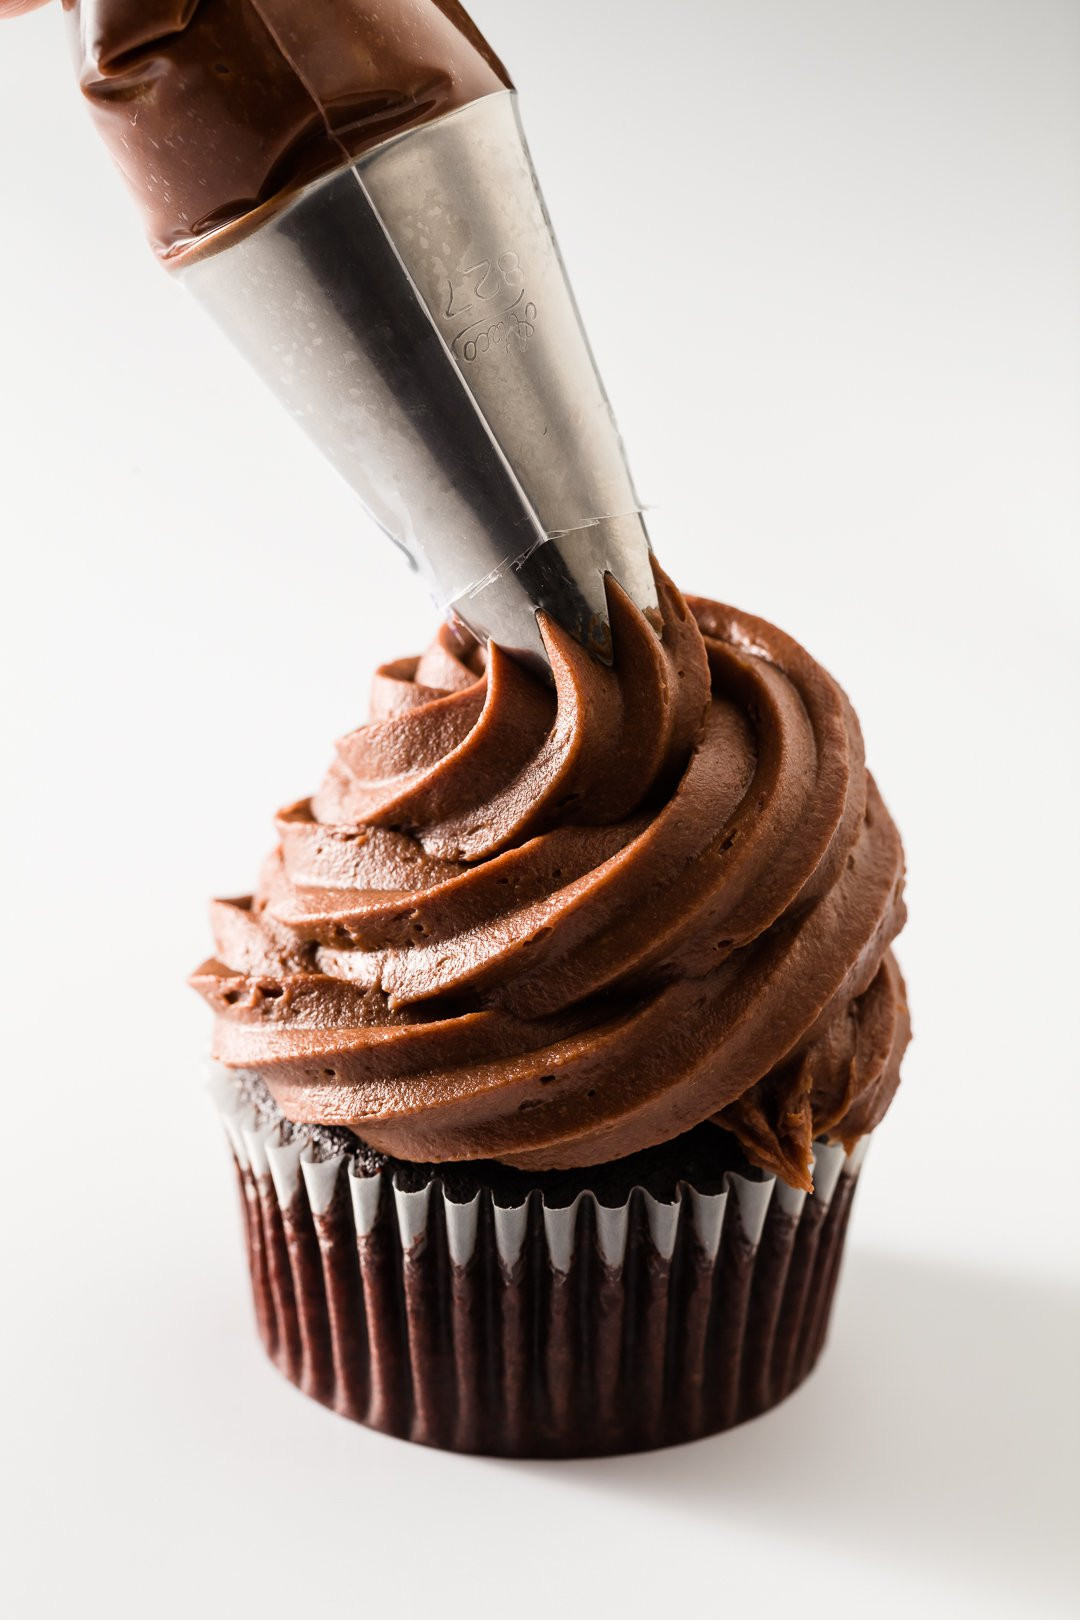 Chocolate Cupcakes With Cream Cheese Frosting
 Perfect Chocolate Cream Cheese Frosting